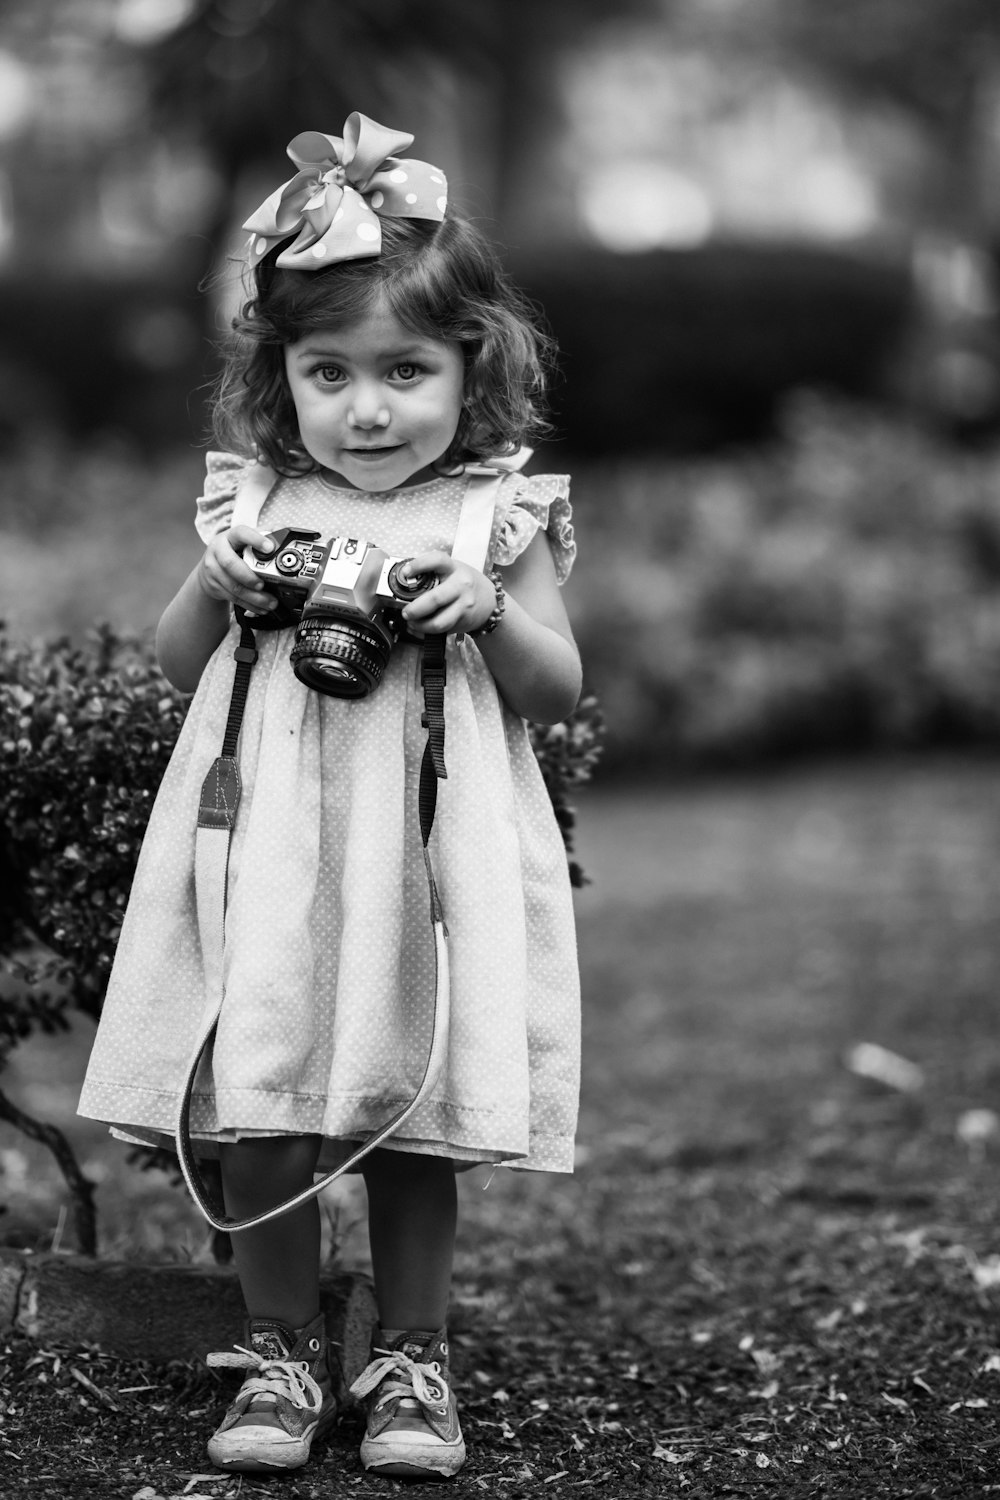 girl holding DSLR camera in grayscale photo